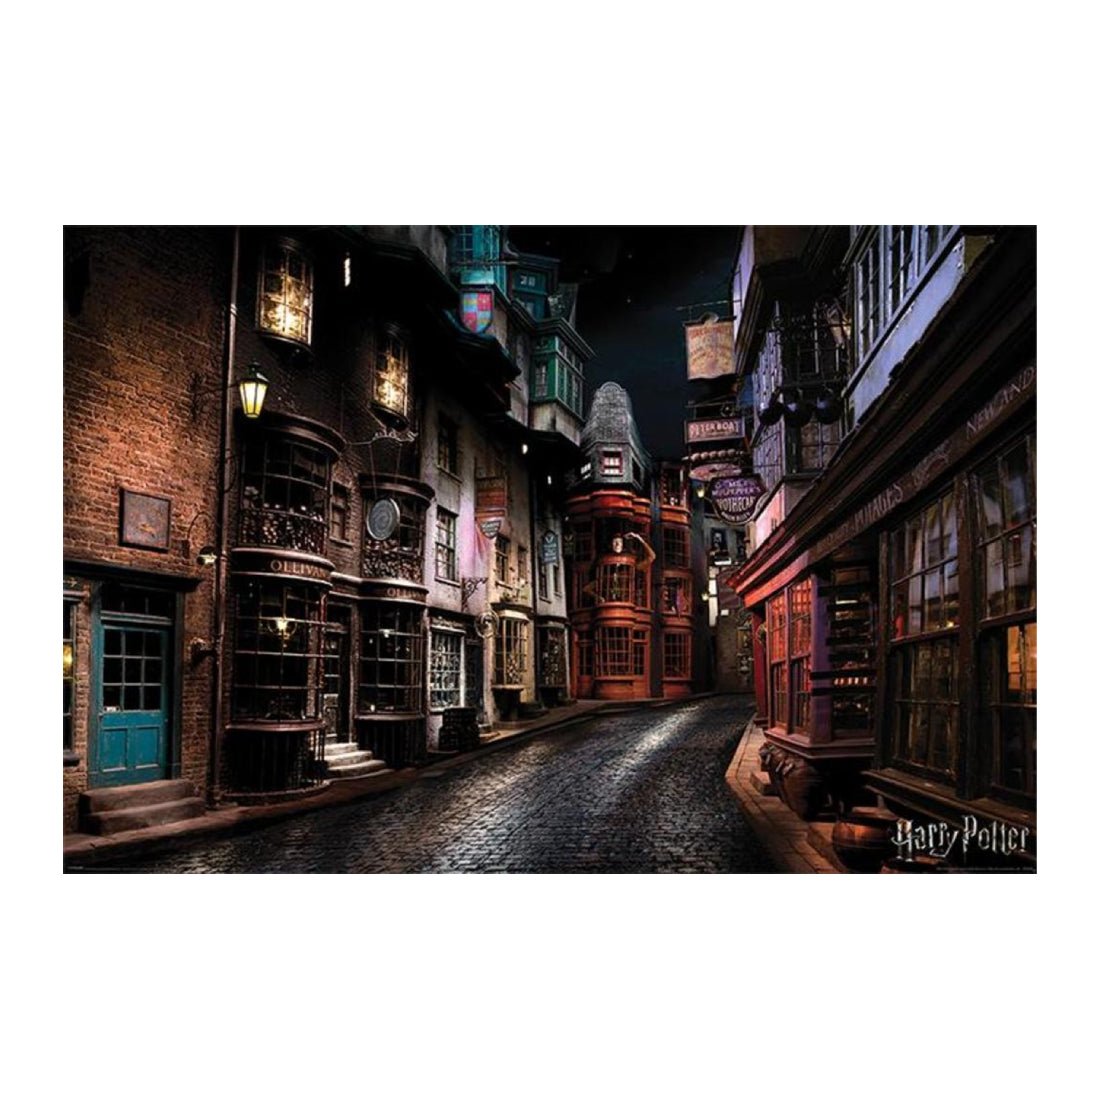 Harry Potter - Diagon Alley Maxi Posters - أكسسوار - Store 974 | ستور ٩٧٤